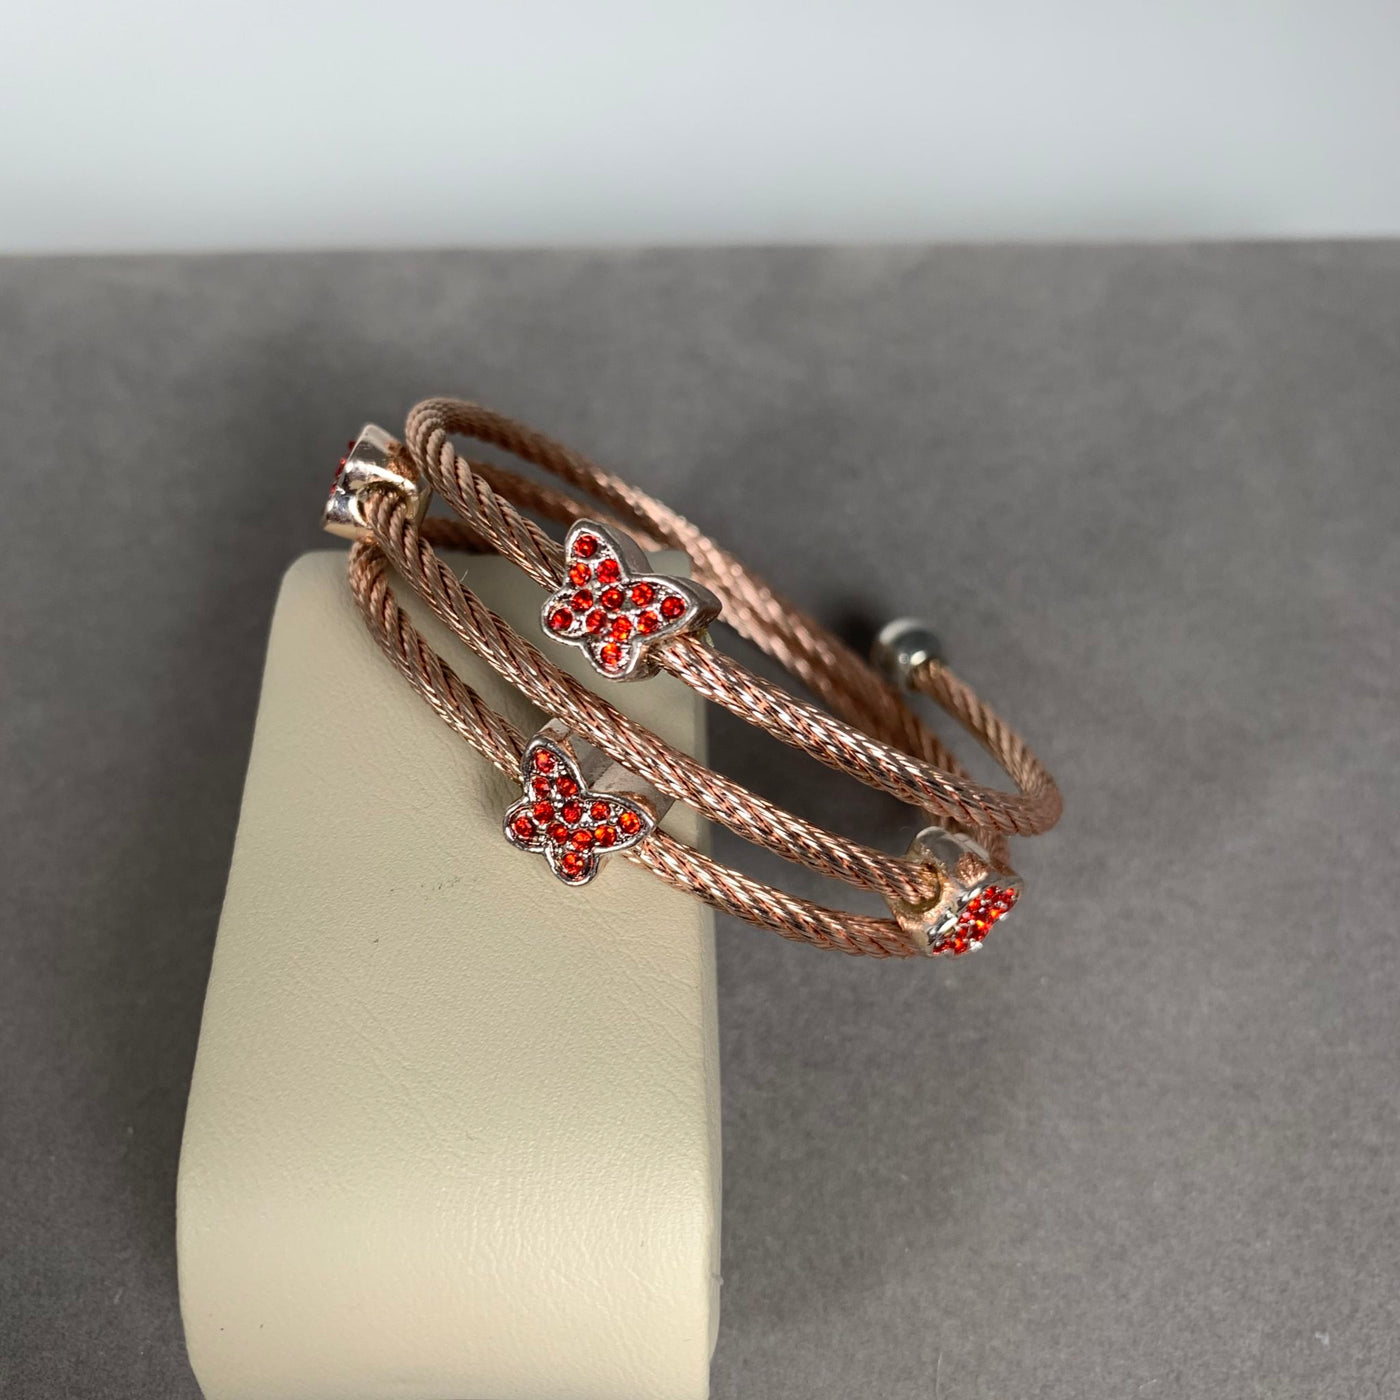 Rose Gold Tone Spiral Wire Bangle Bracelet with Red Crystal Motifs